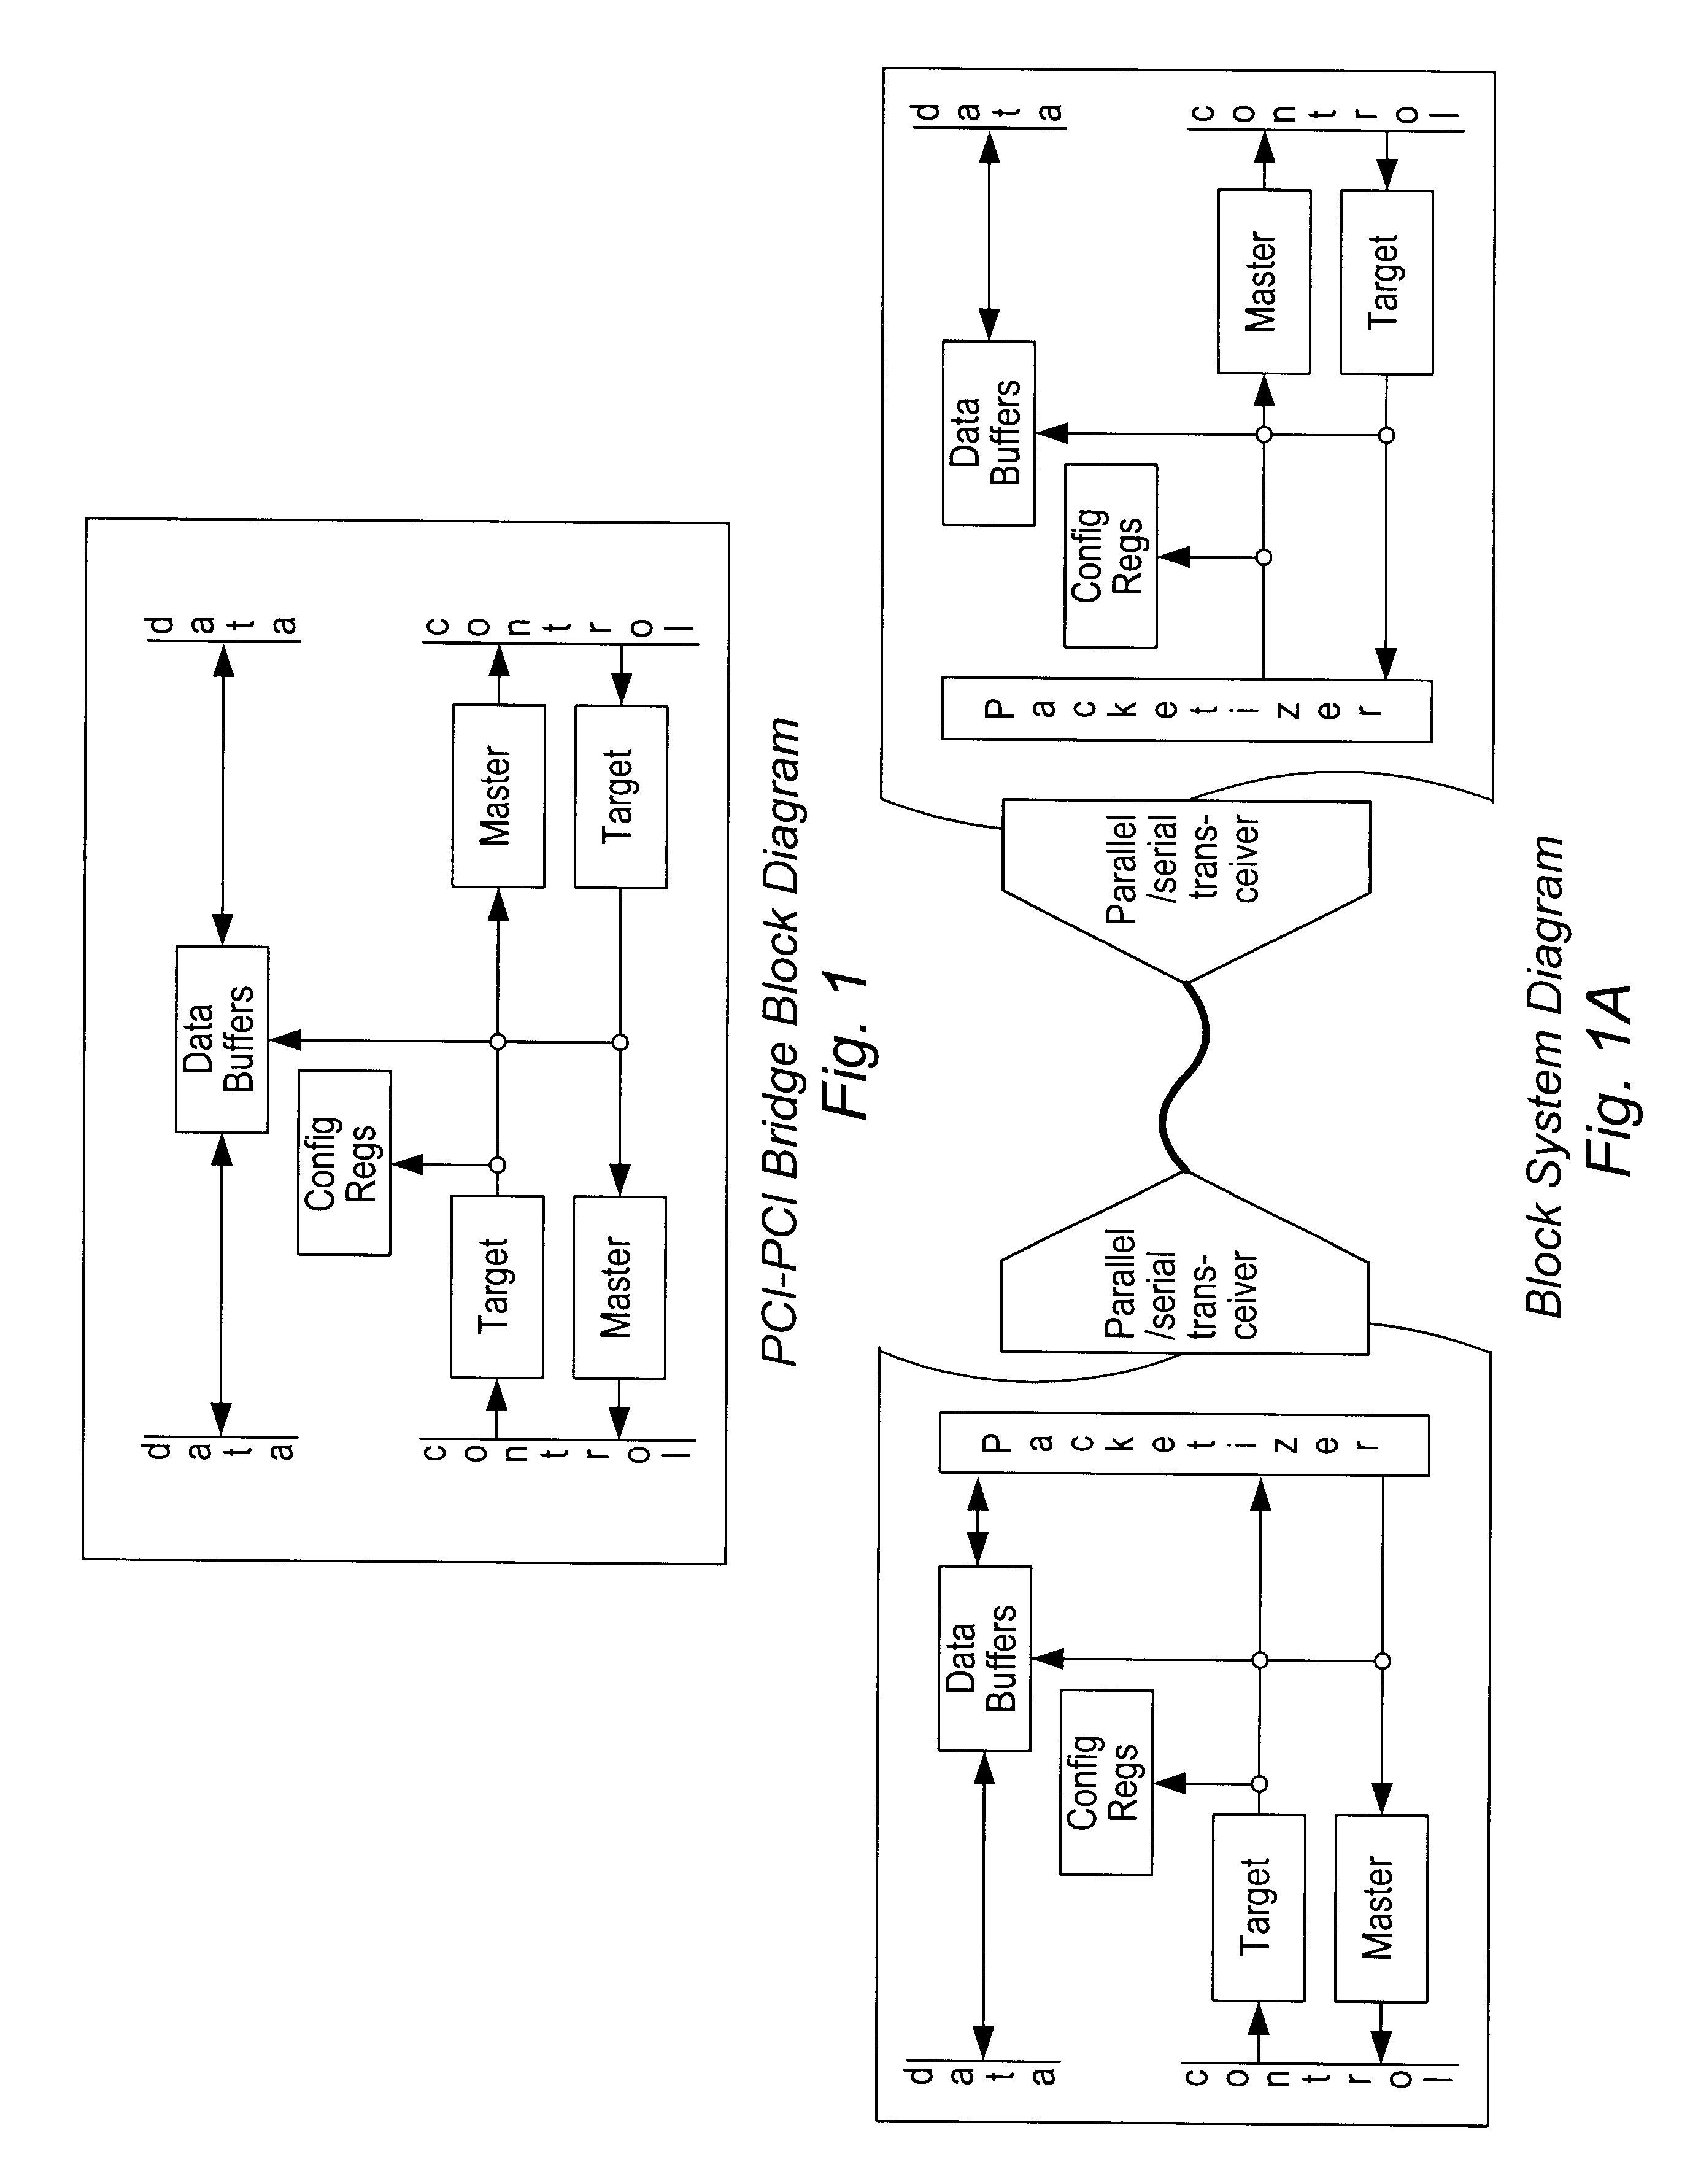 System and method for coupling peripheral buses through a serial bus using a split bridge implementation